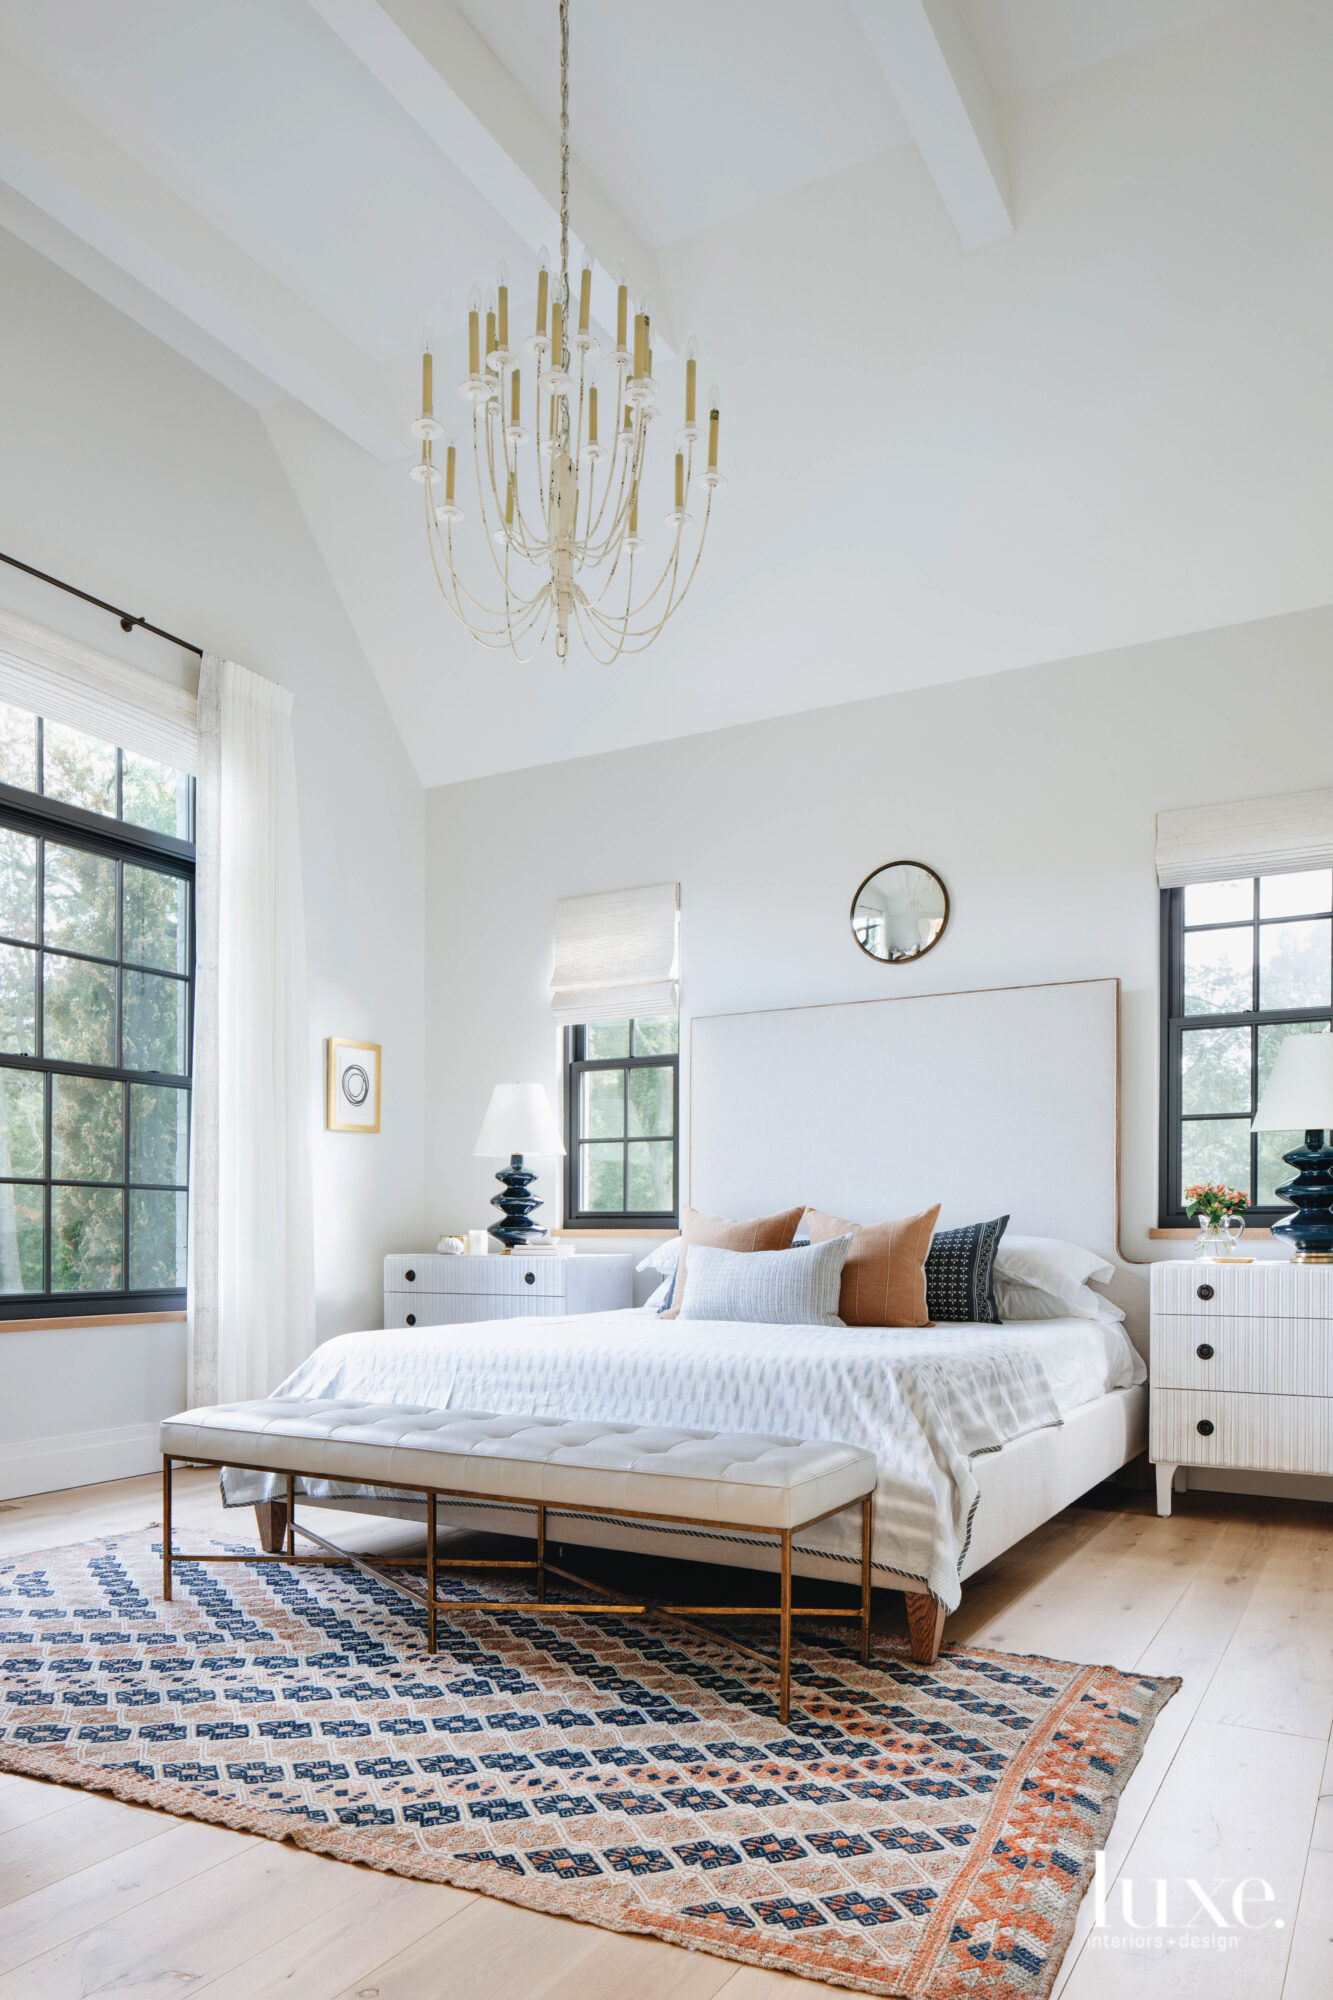 Soft neutrals dominate the master bedroom, with pops of camel and navy for punctuation.